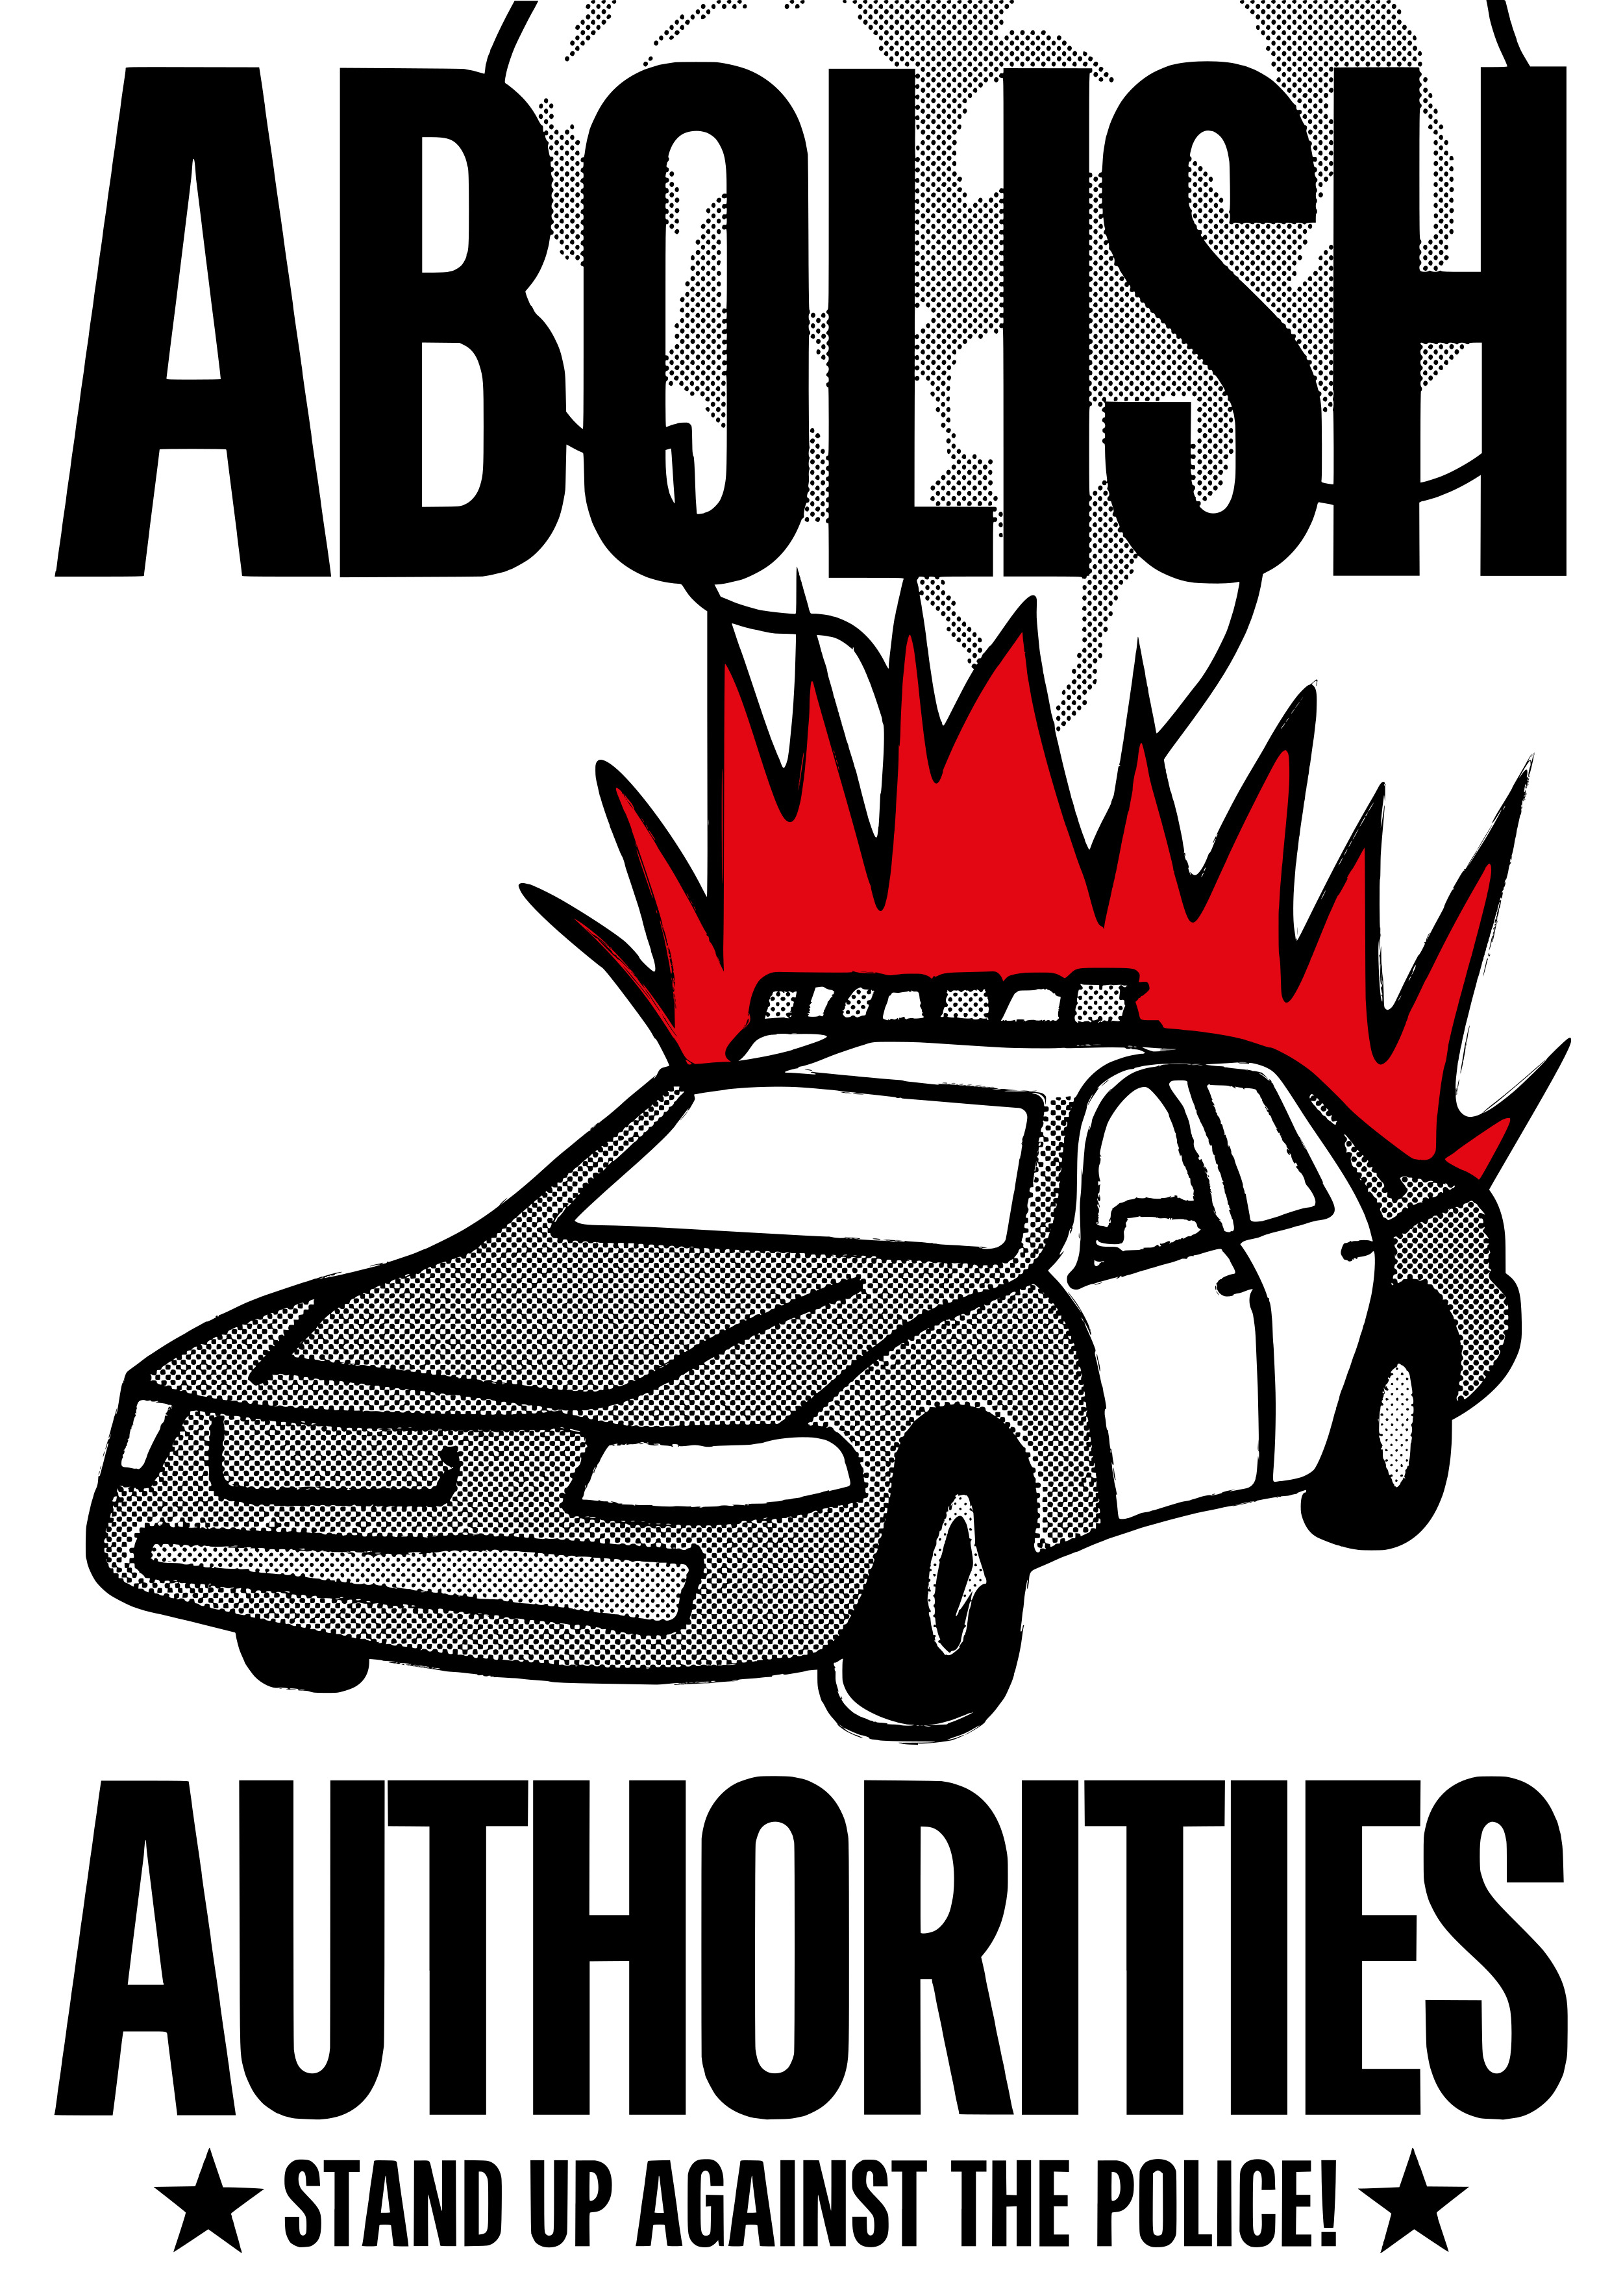 Abolish authorities, stand up against the police!